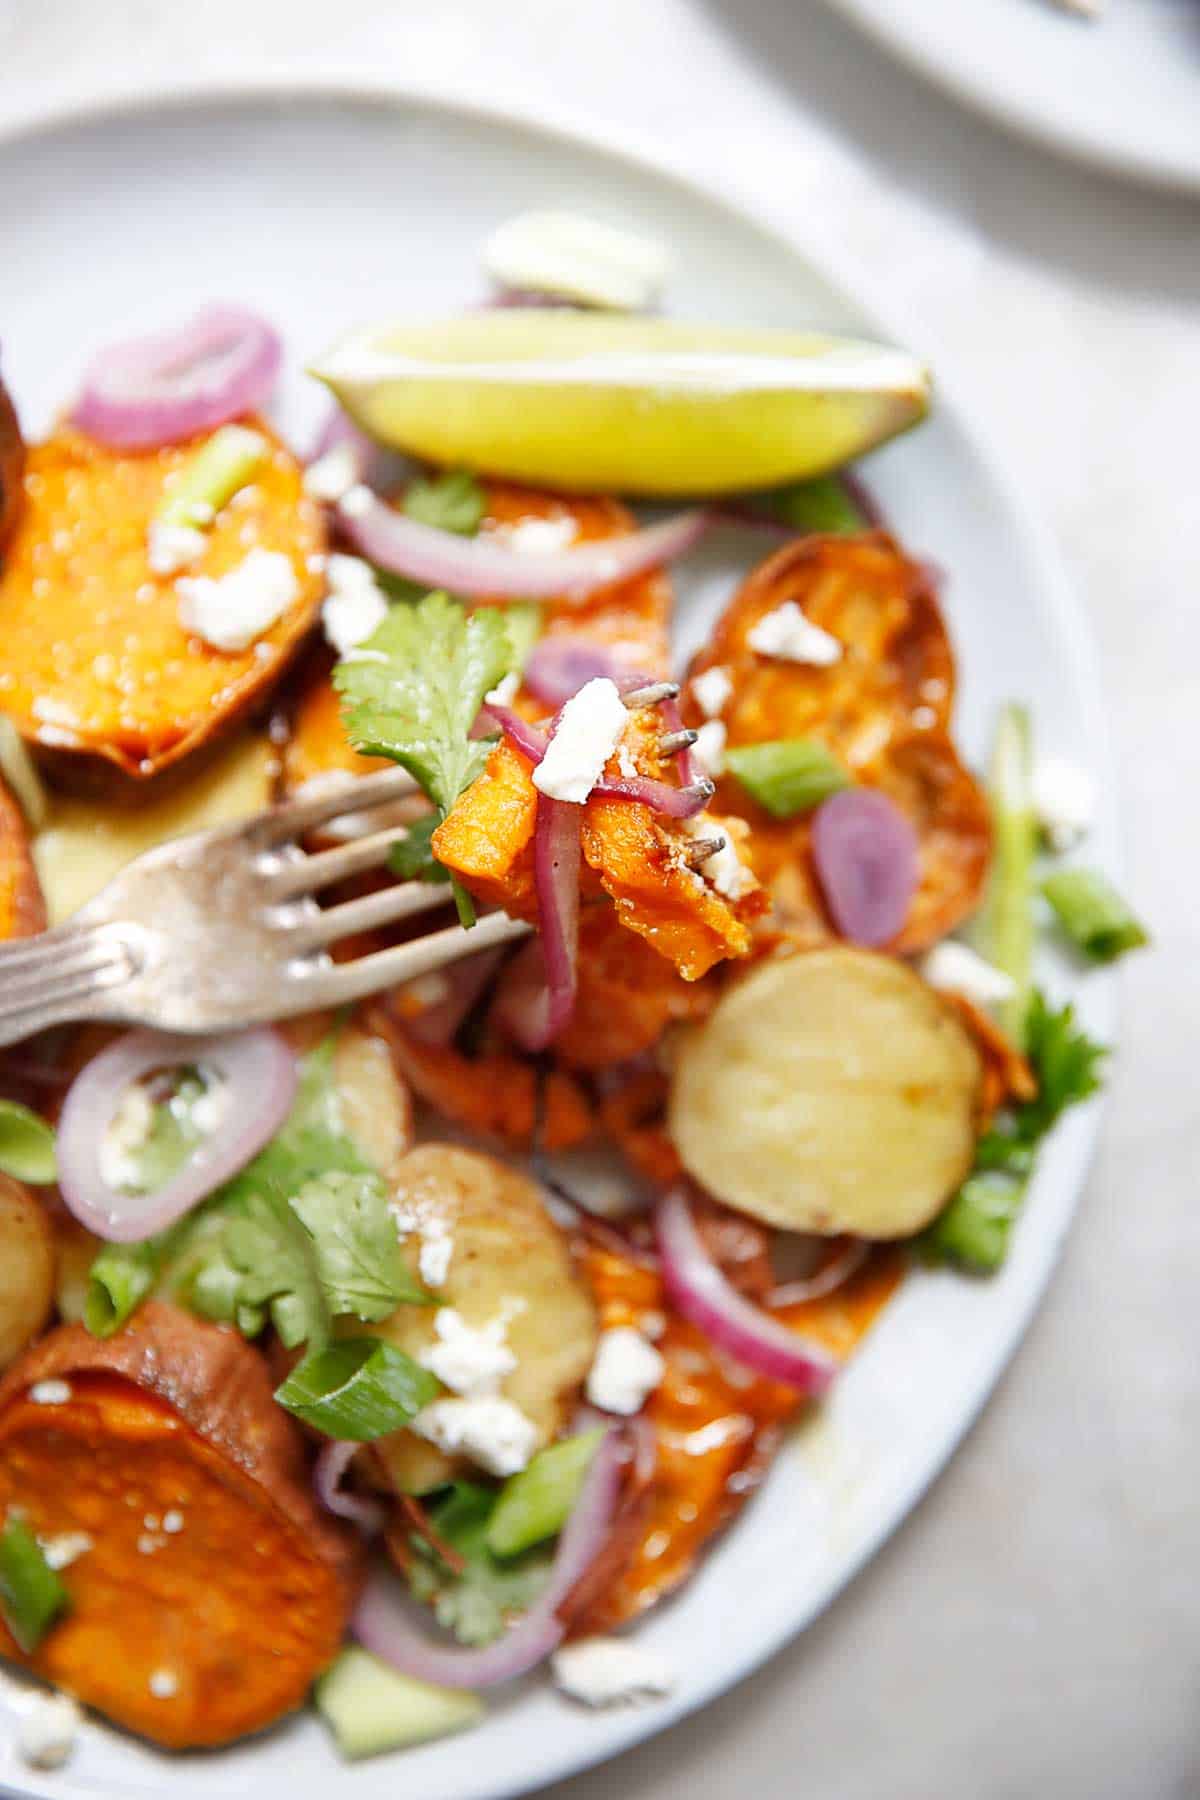 Lexi's Clean Kitchen | Grilled Sweet Potato Salad with Honey Mustard